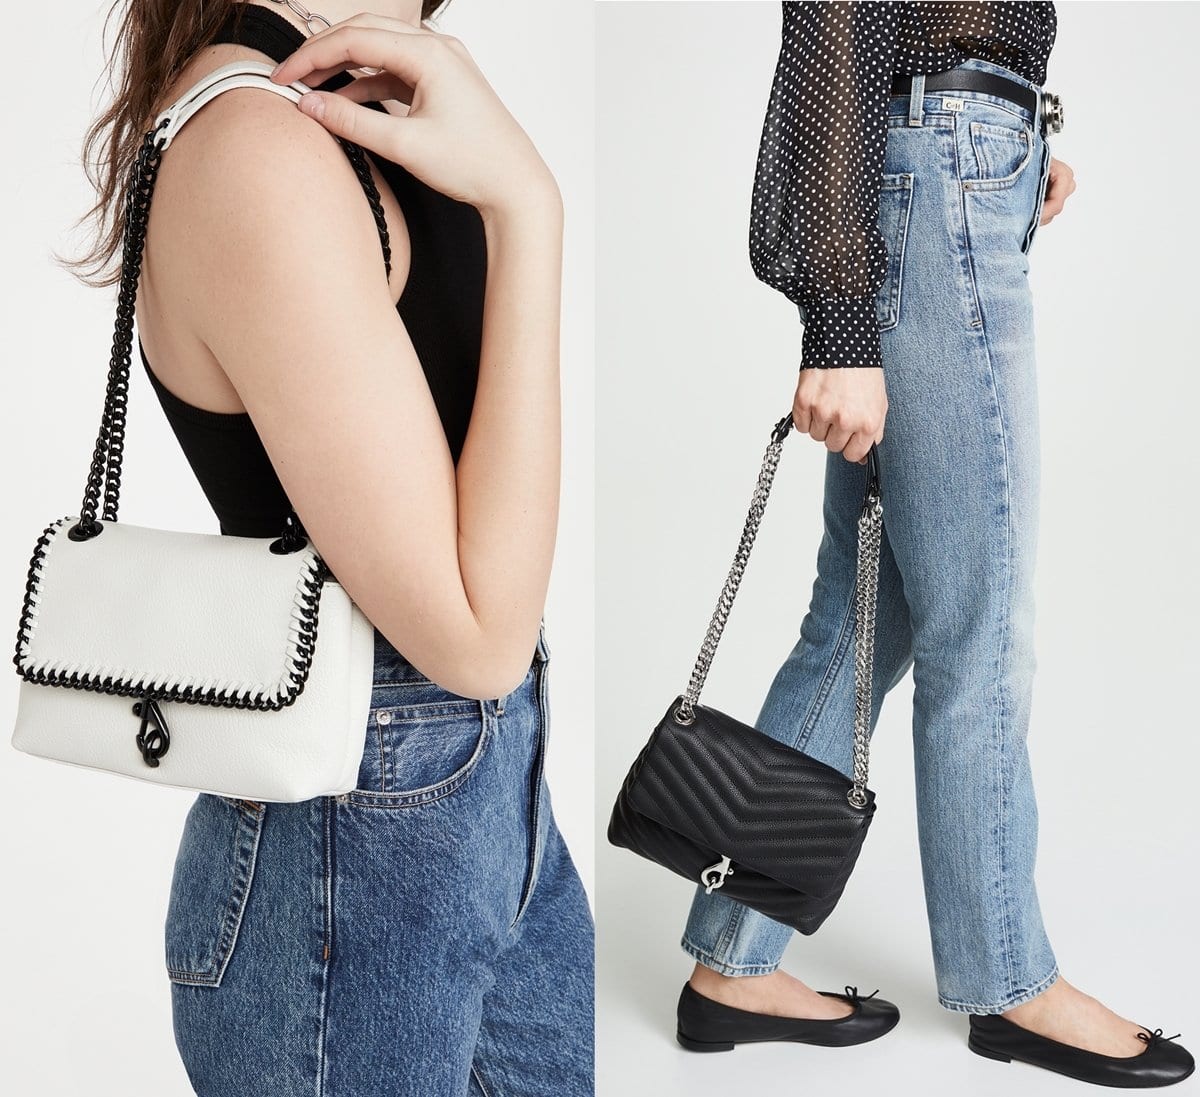 Rebecca Minkoff's understated Edie crossbody bag is the perfect way to accentuate everyday ensembles